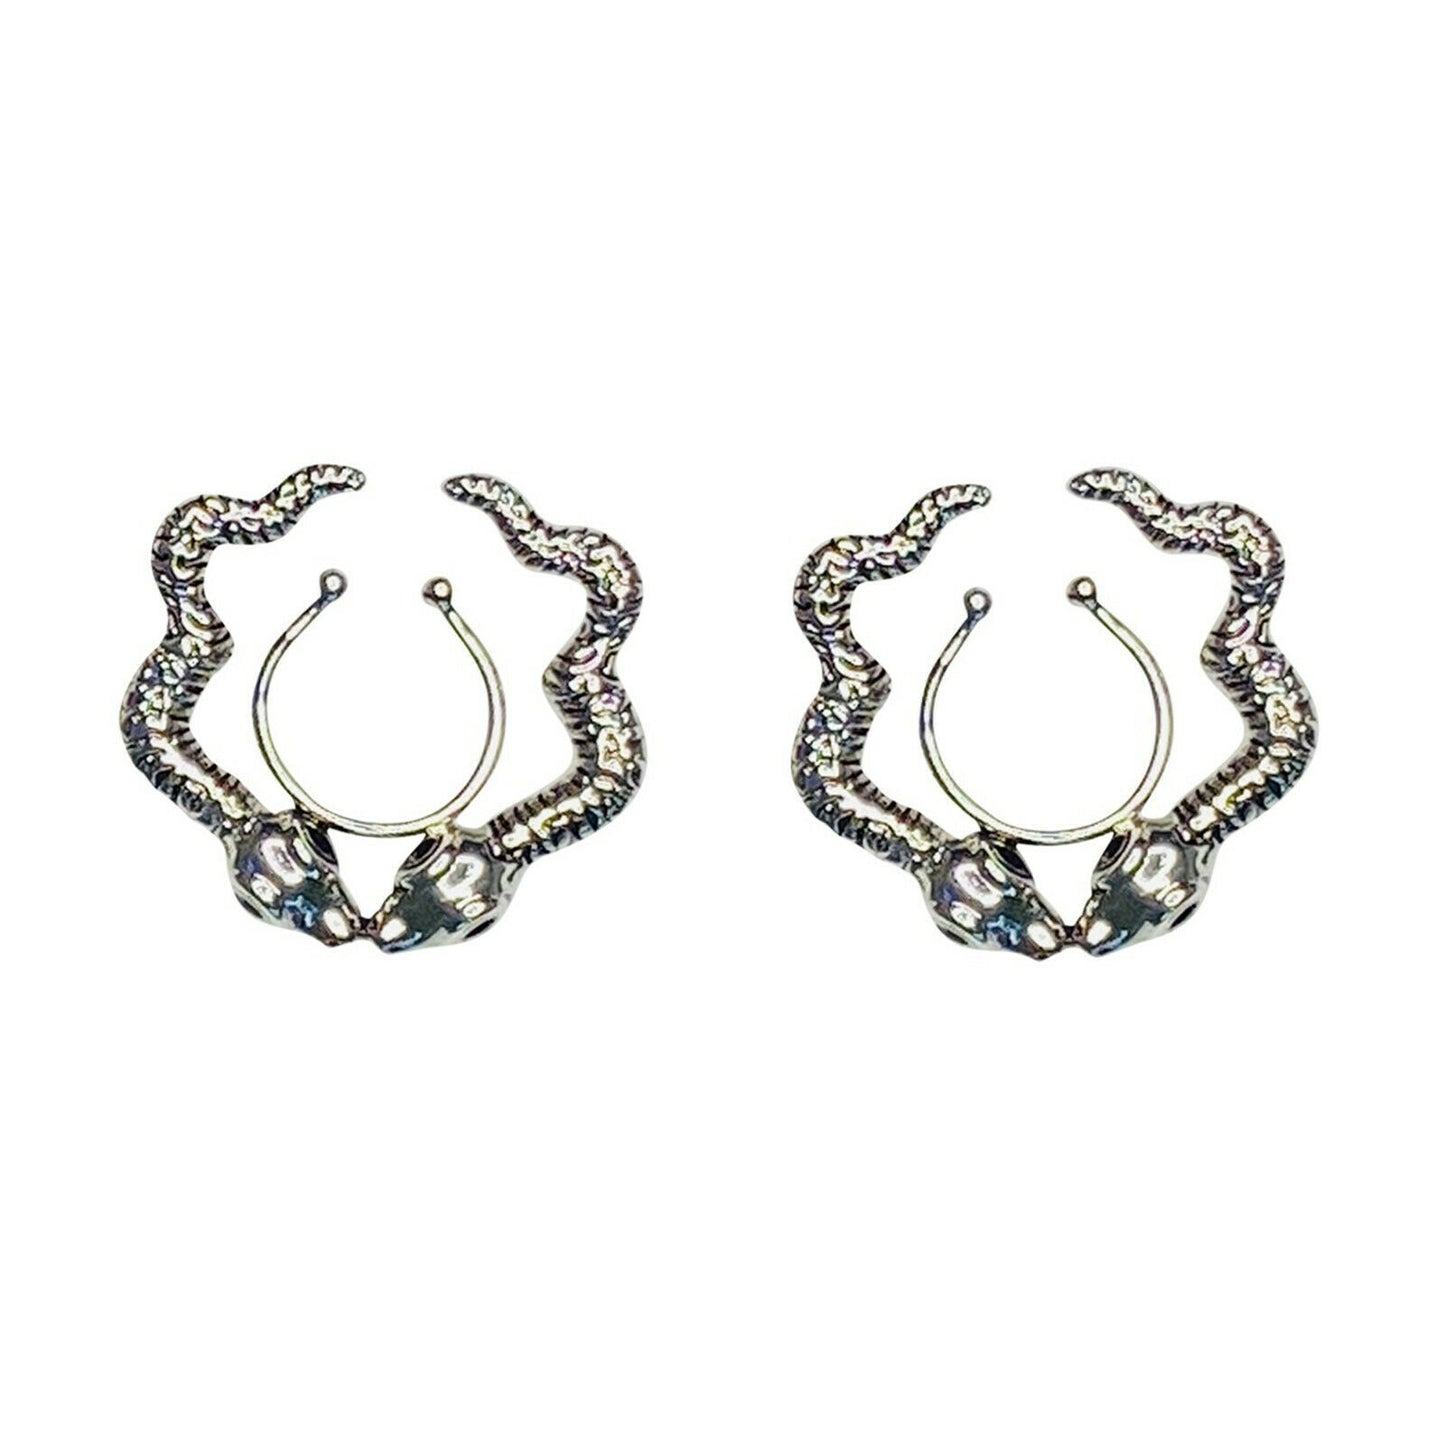 Nipple rings Clip on Faux jewelry Adjustable clip to fit two snakes design